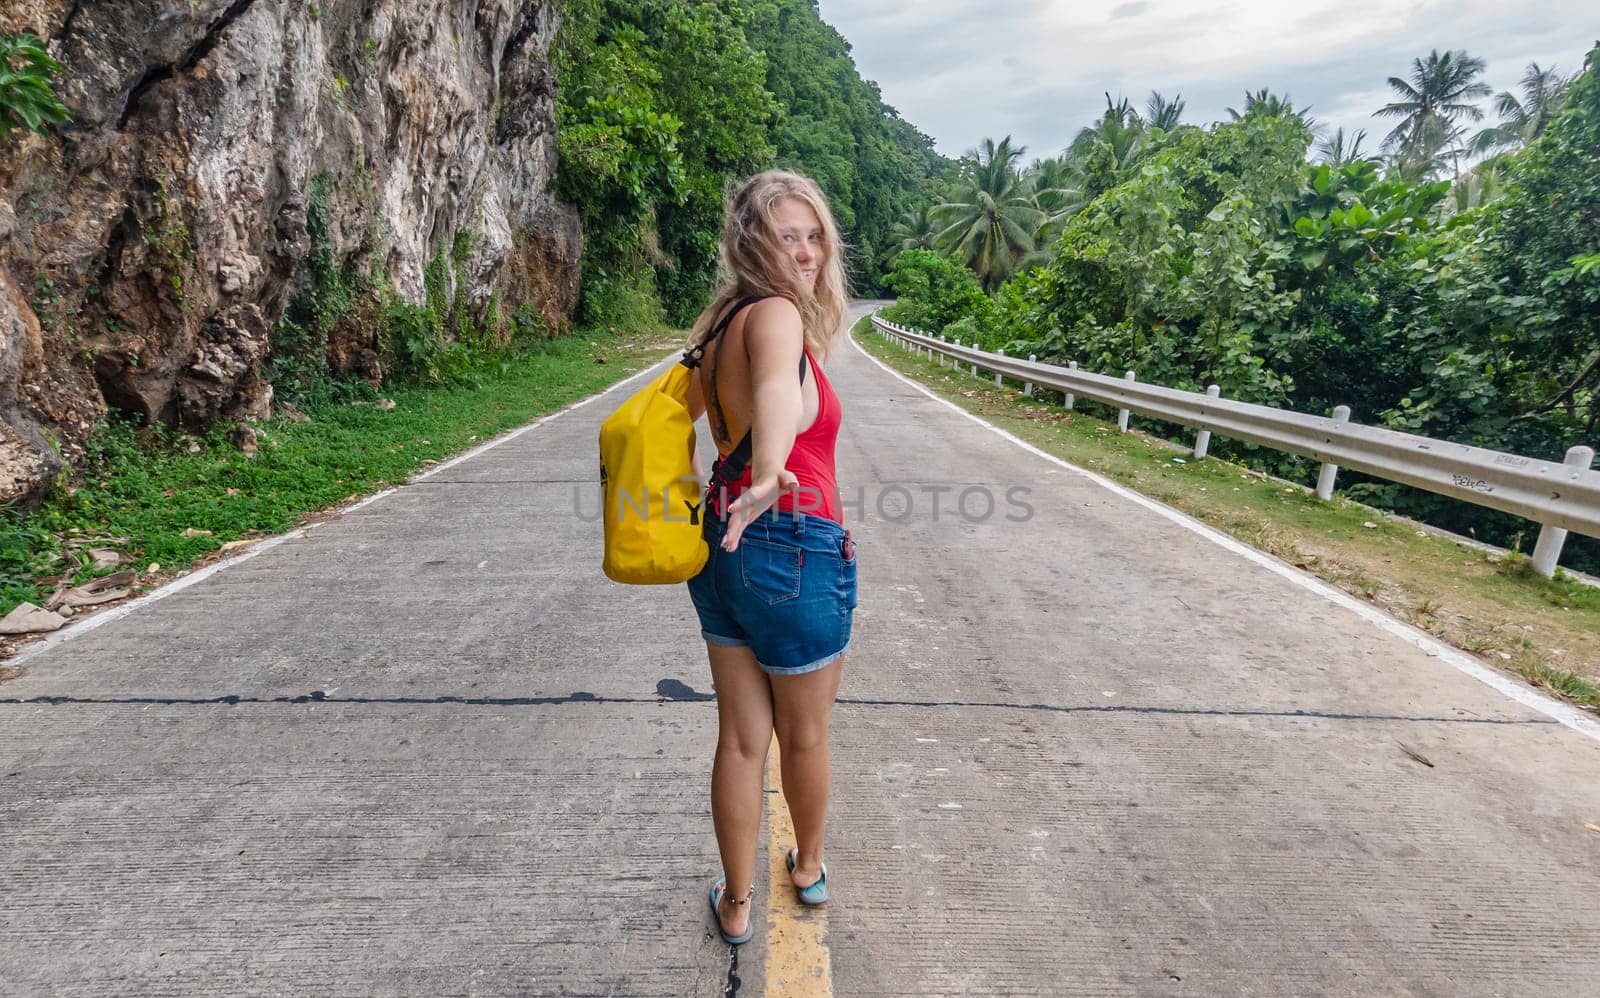 A young woman with a yellow backpack appears to be inviting the viewer to join her as she explores a deserted road lined with dense, green foliage and towering cliffs.